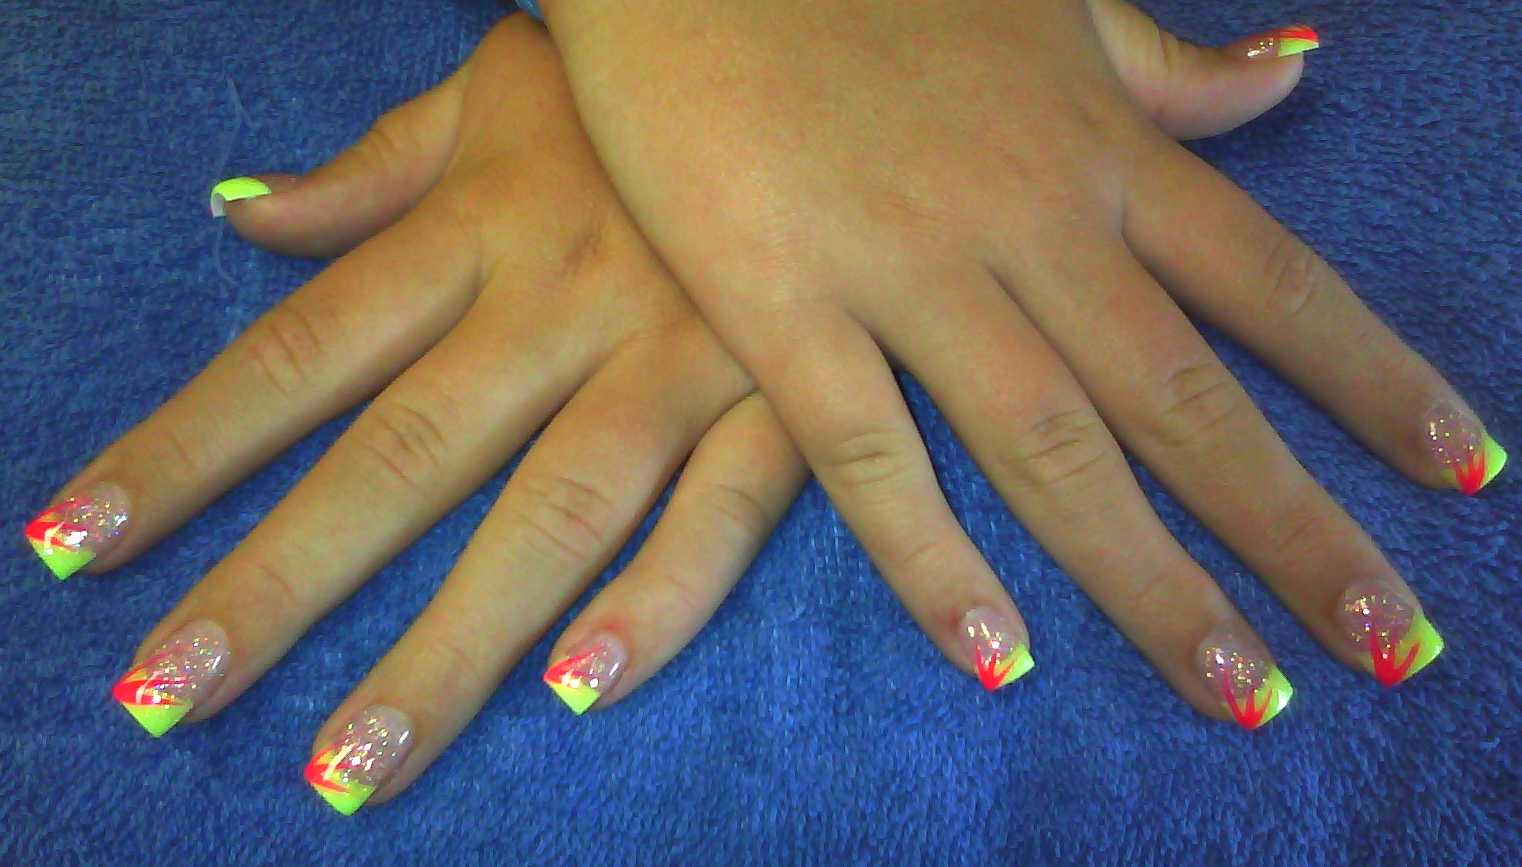 4. "Neon Edgy Acrylic Nail Design" - wide 3